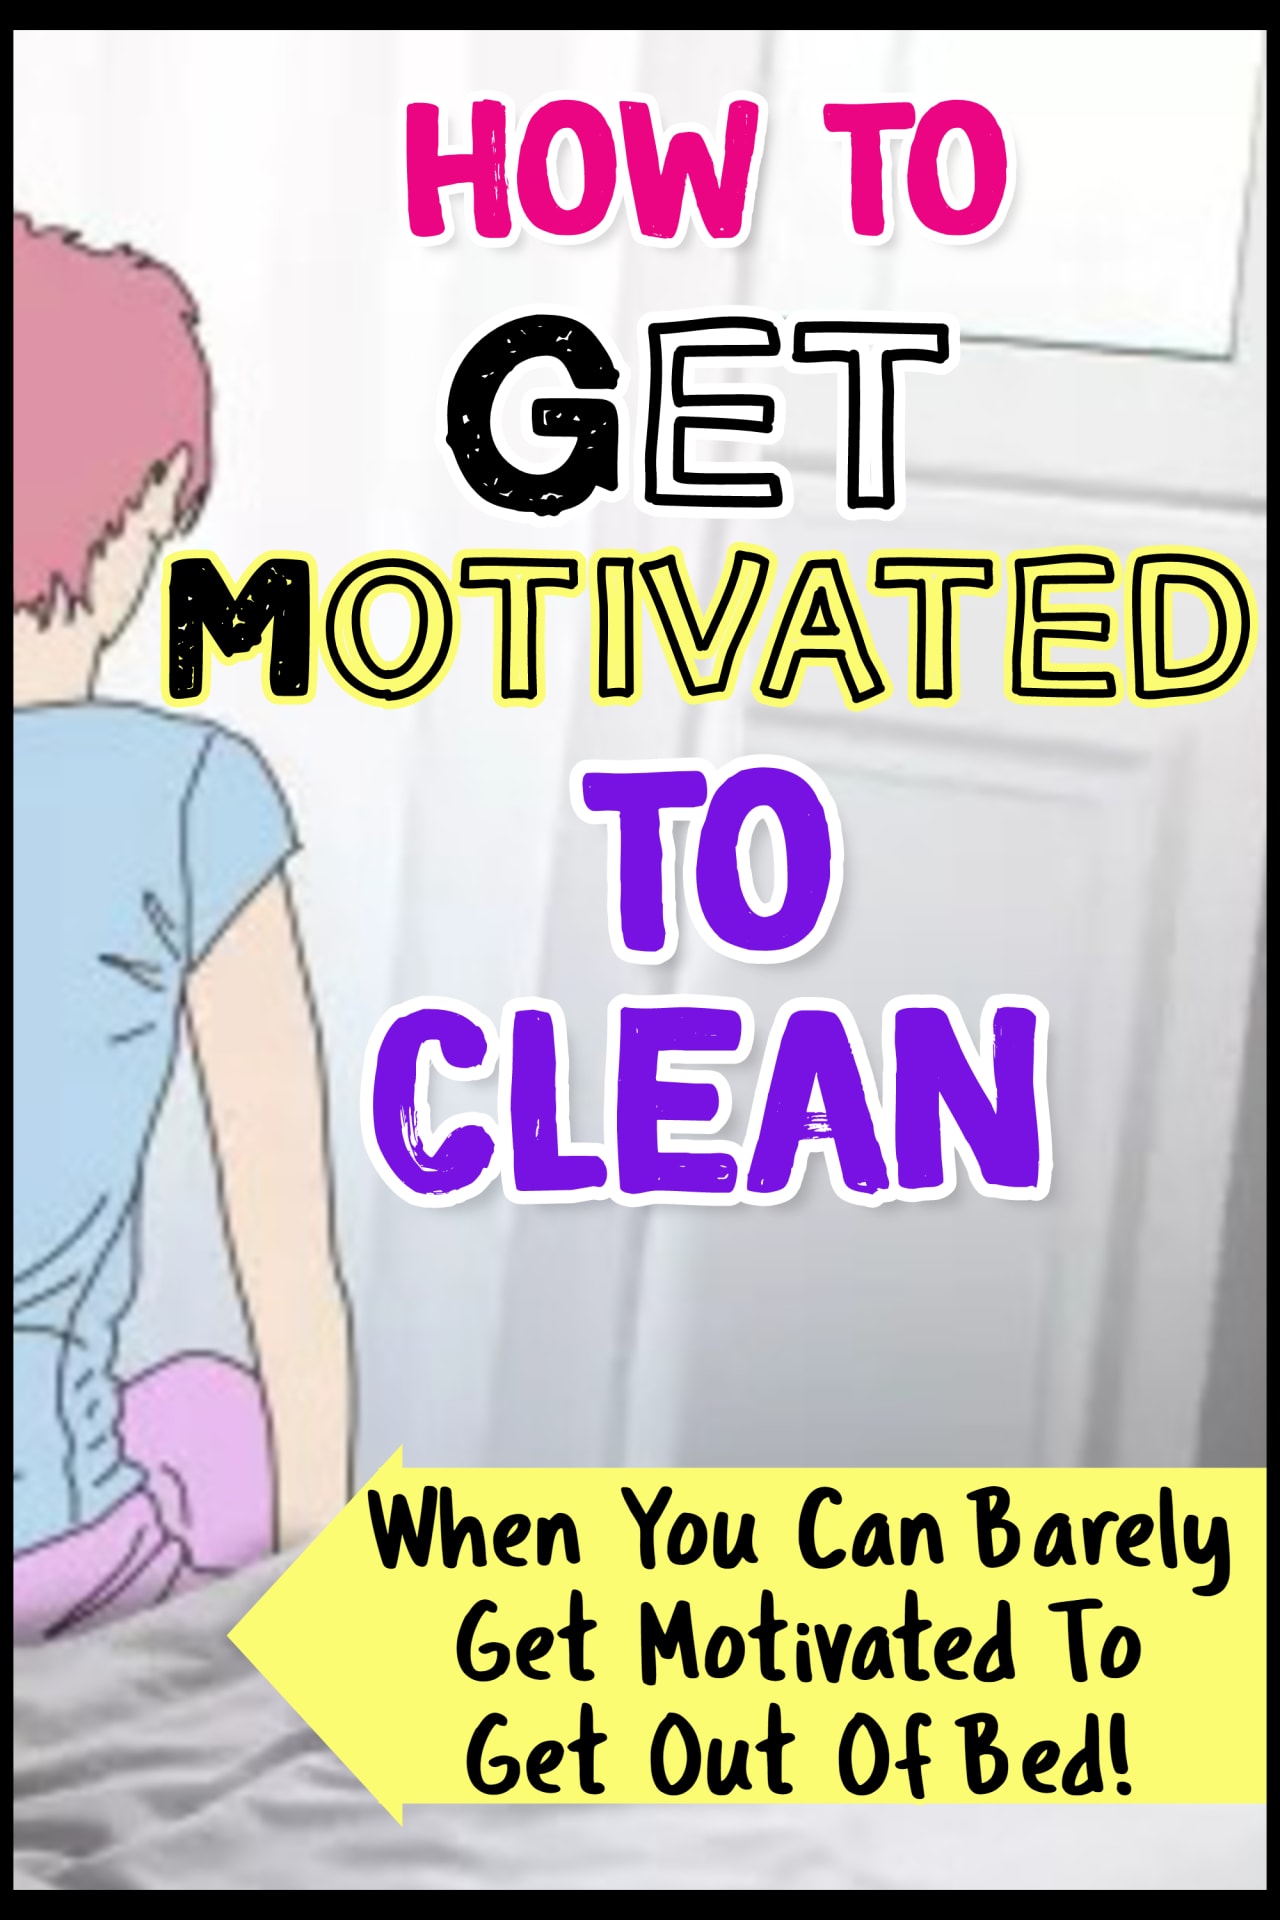 Cleaning motivation - how to get motivated to clean and declutter when depressed.  You don't need cleaning motivation quotes - you DO need to know the fastes what to clean a house when you're sad, depressed or UNmotivated to do anything at all. Whether you want to know how to clean a cluttered room, need help cleaning out your house or last minute cleaning help (or even neat house cleaning services, tips and tricks) - a cluttered house might be a sign of depression or temporary sadness.  These cleaning hacks will help you get motivated.